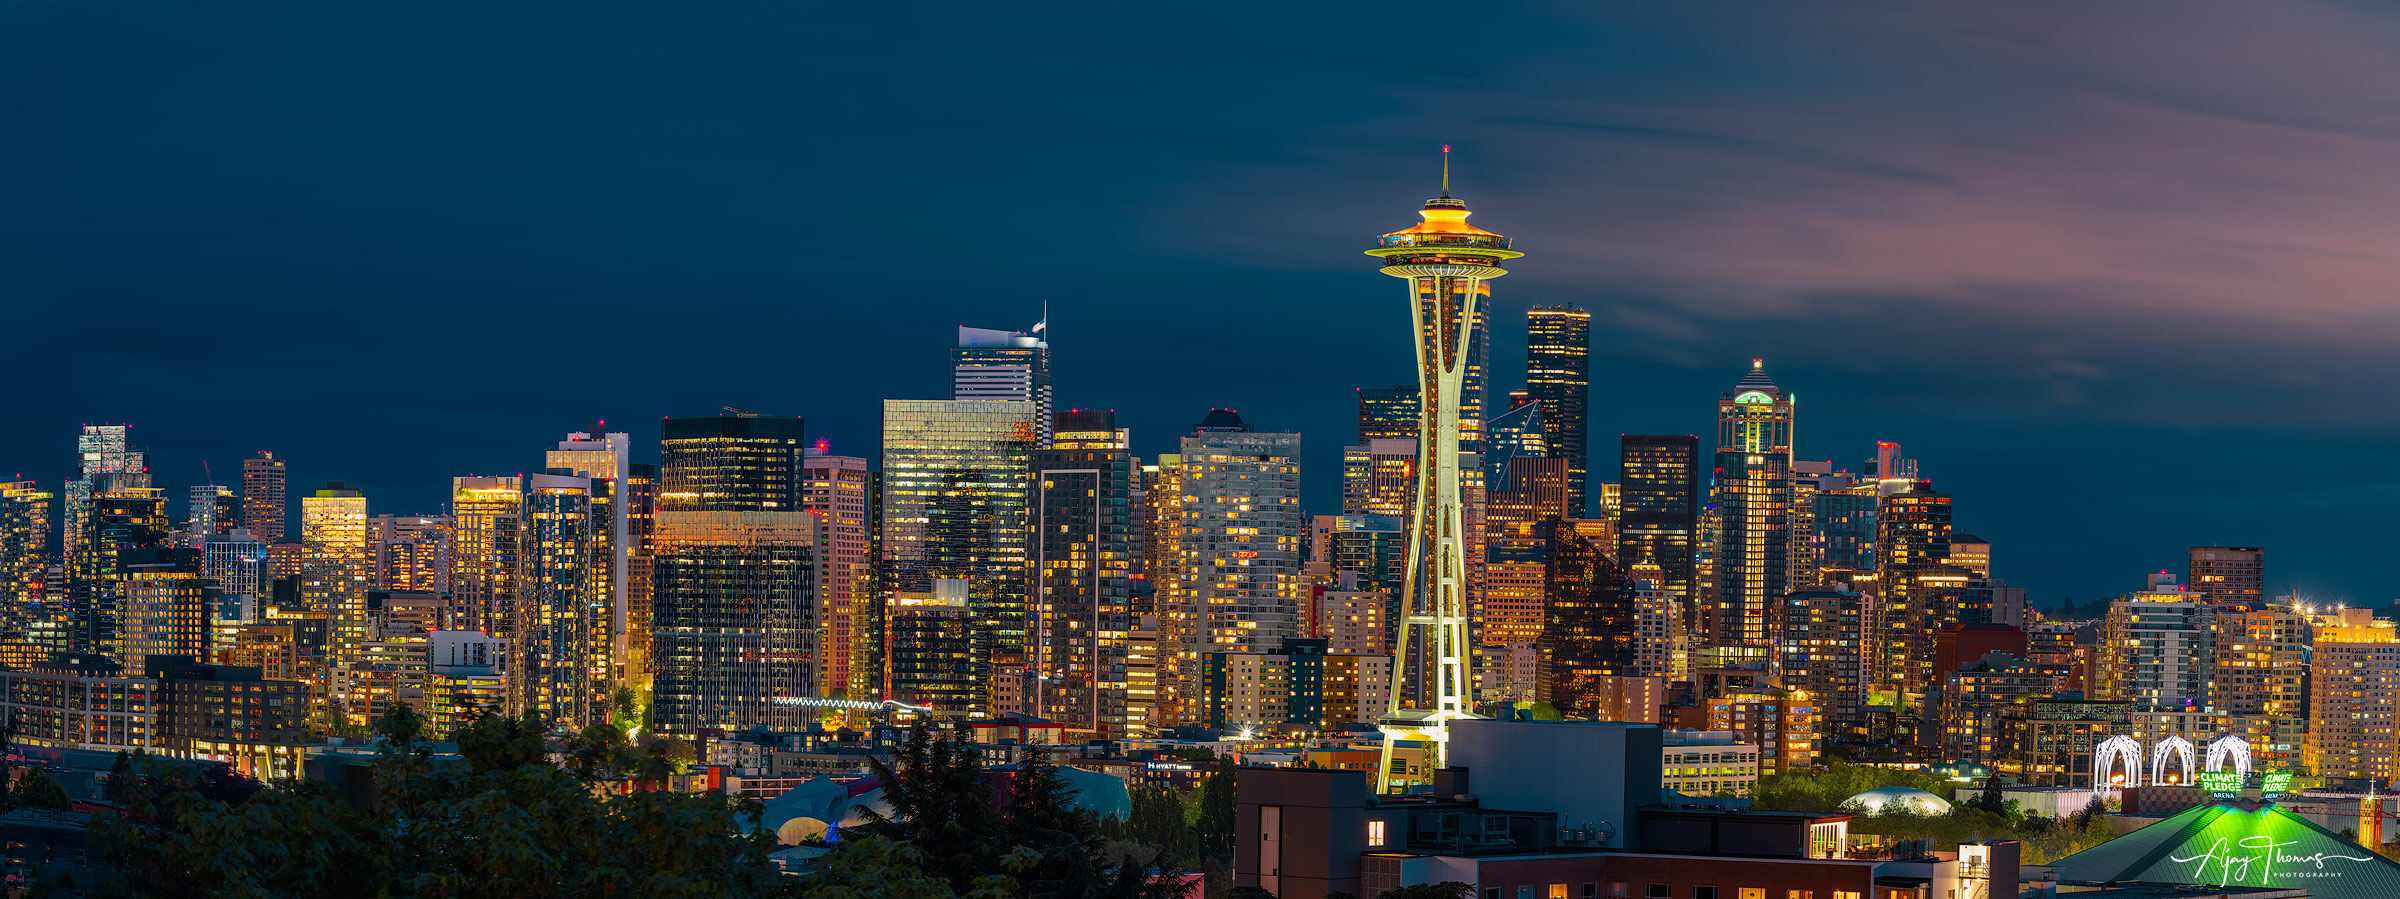 Seattle skyline panorama night photography , Huge wall art print for living room and office space wall decor 